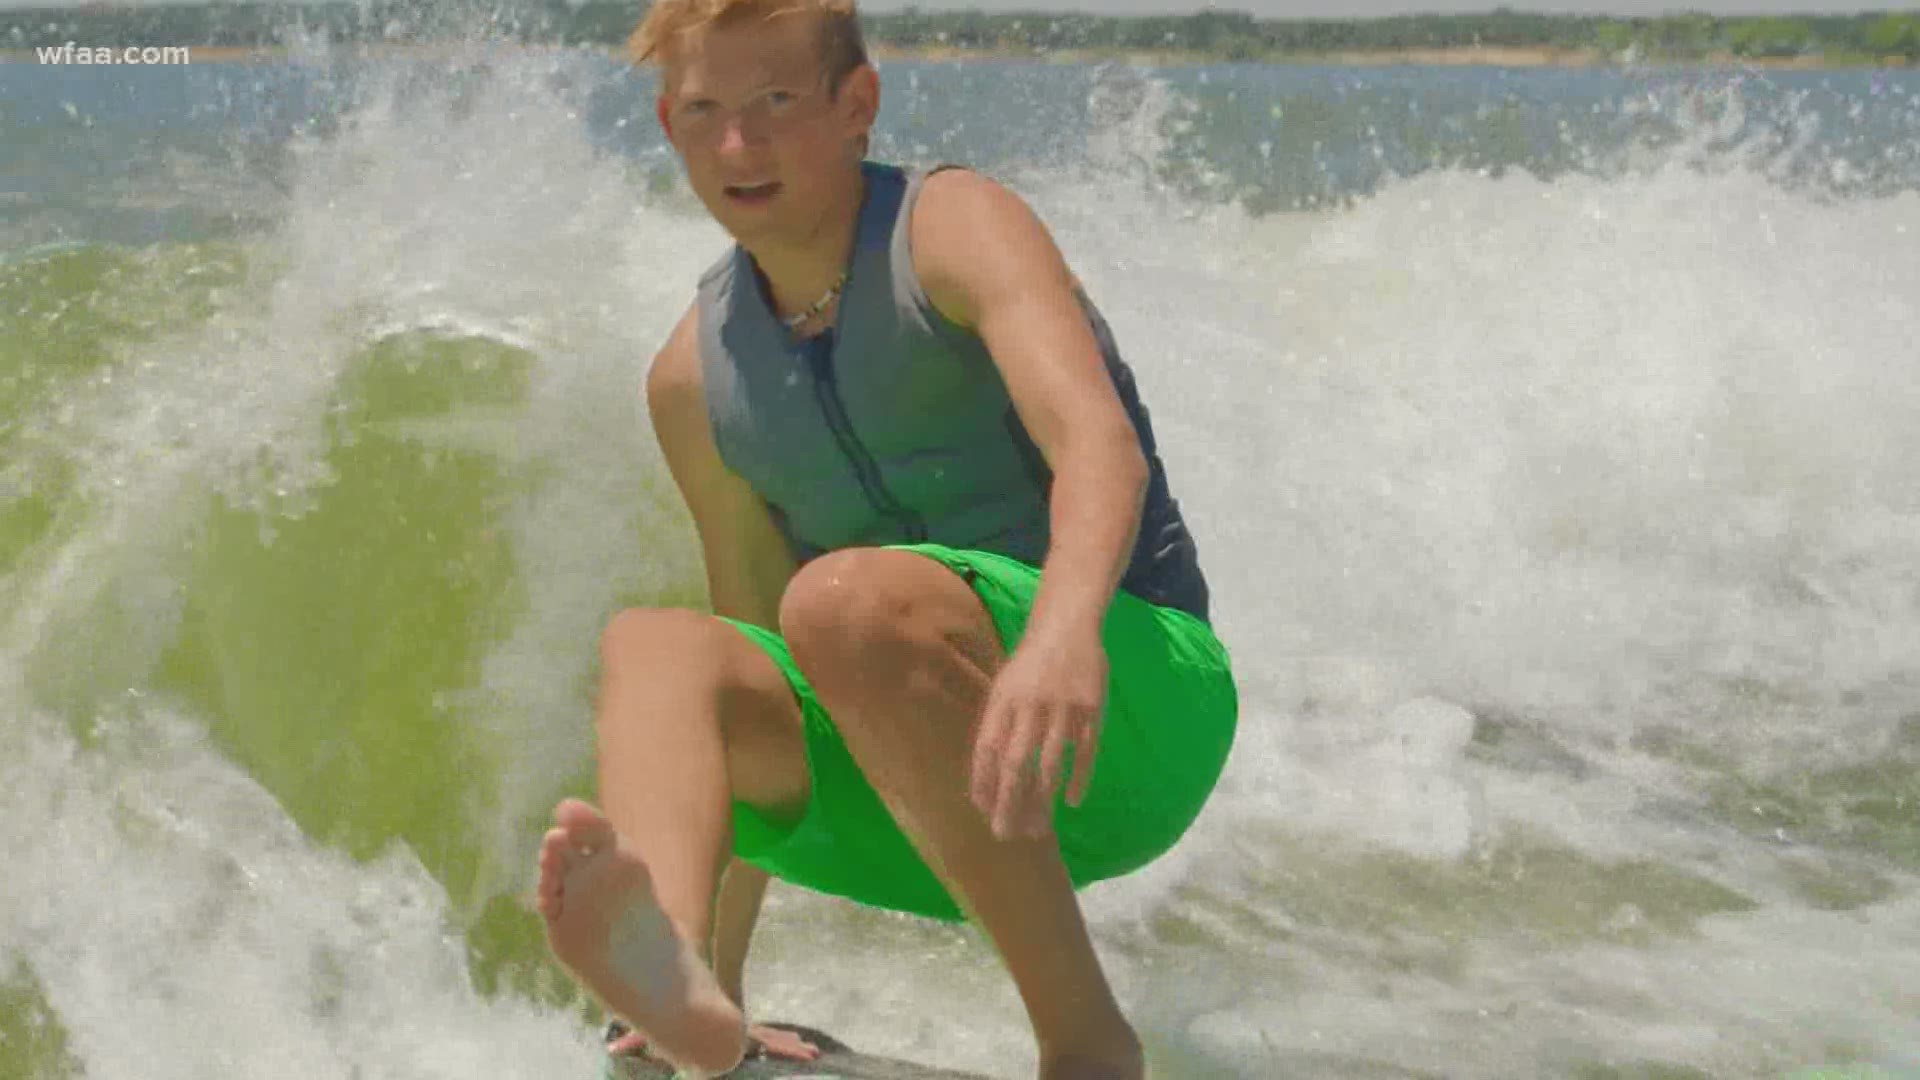 One of the world's top young wakesurfers can be found on Grapevine Lake.